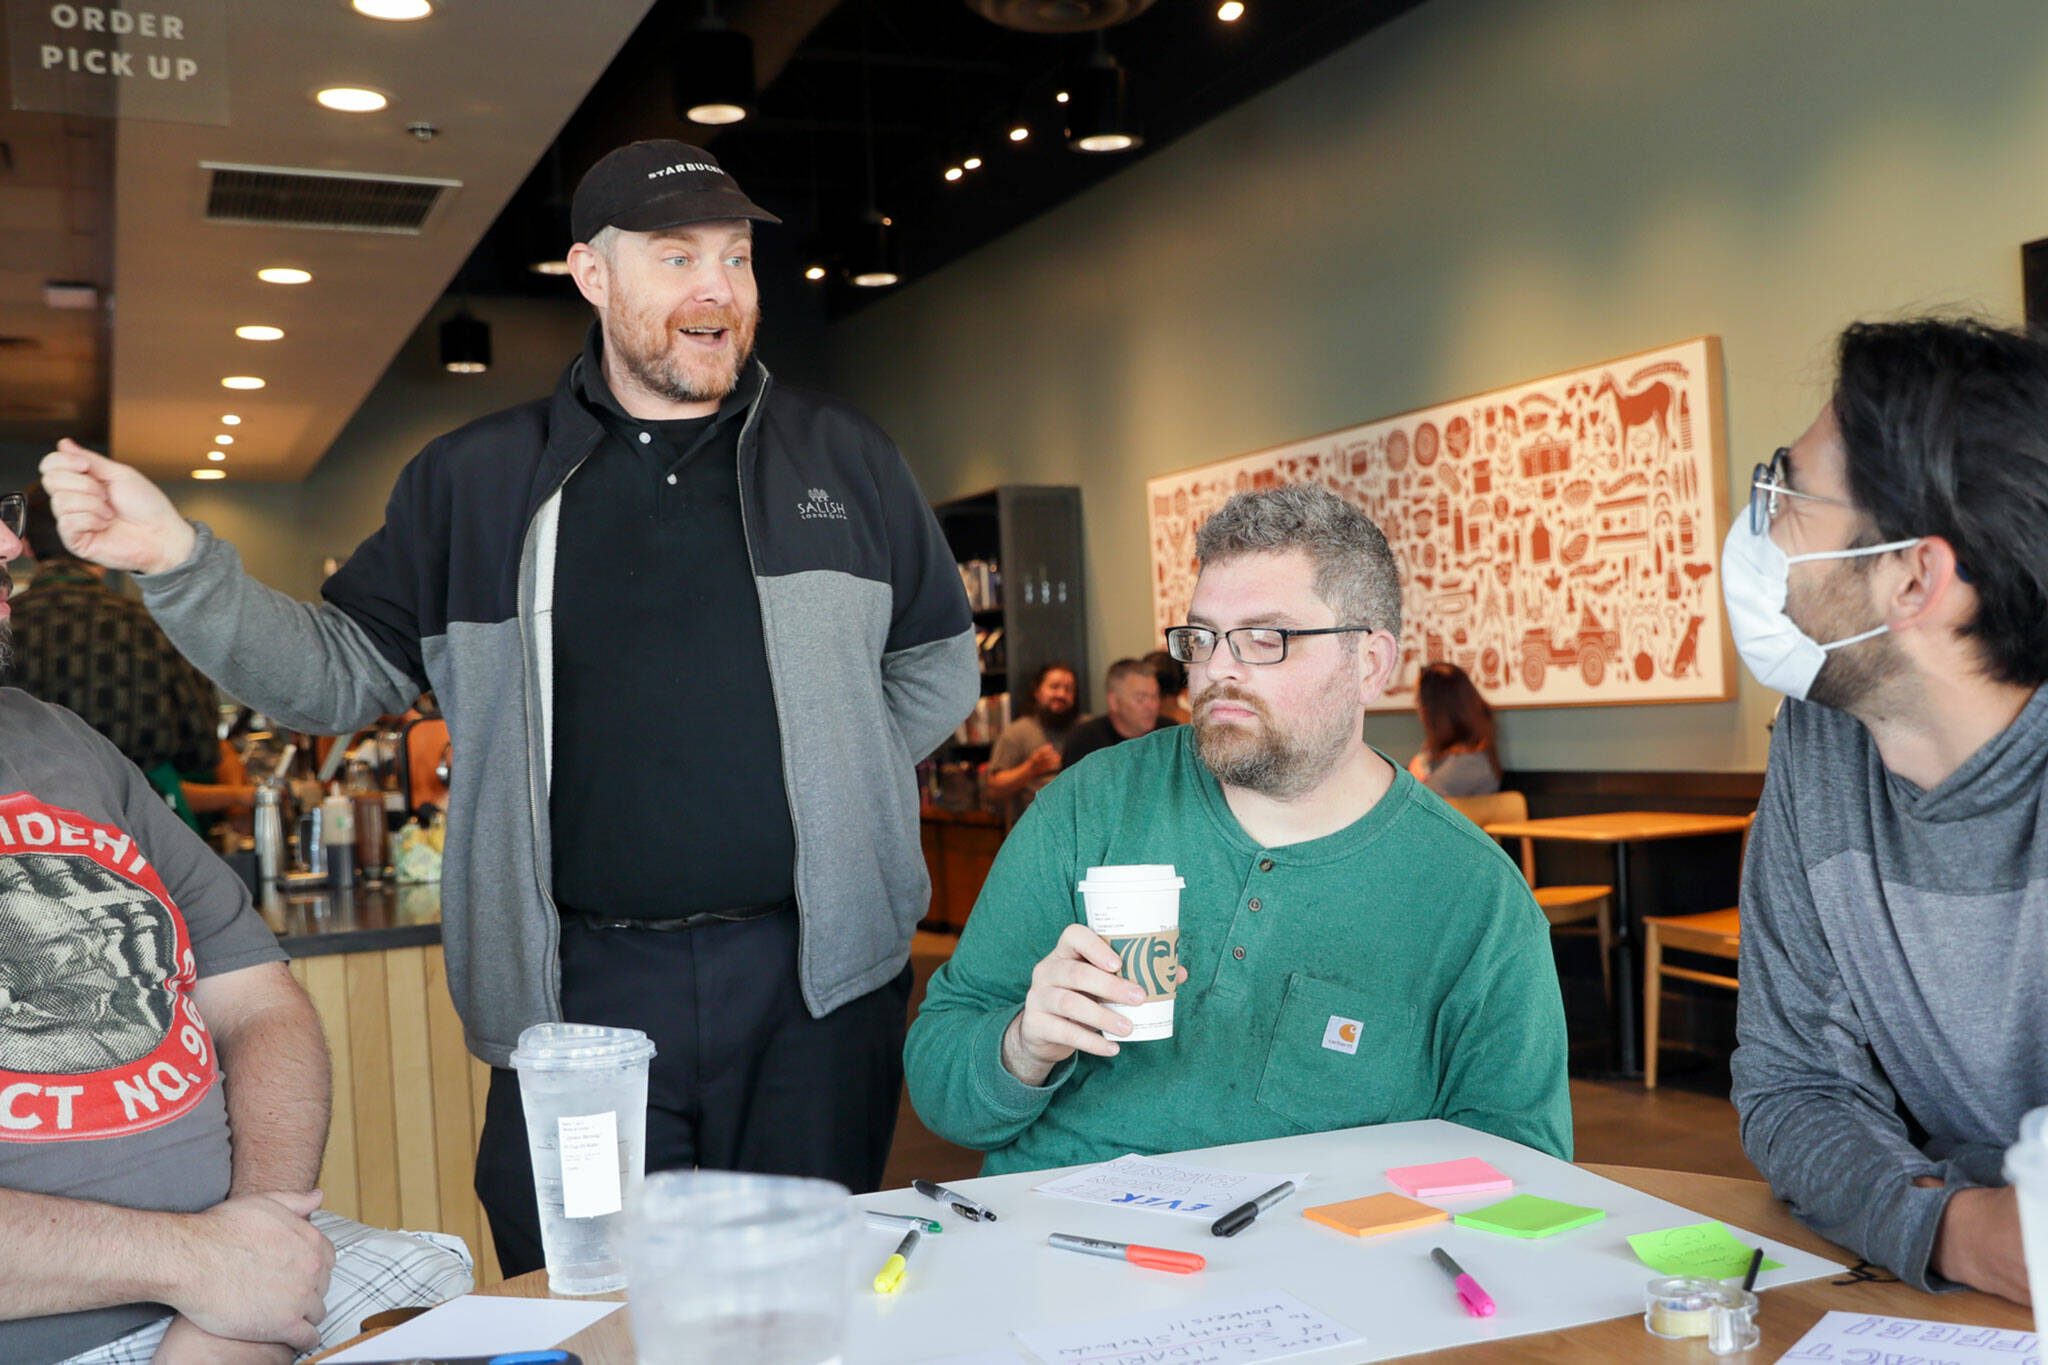 Tom Bosserman, left to right, Cornelius Ersoz and Nick Watkin on Monday morning during a “sip in” at Starbucks for union solidarity in Everett. (Kevin Clark / The Herald)